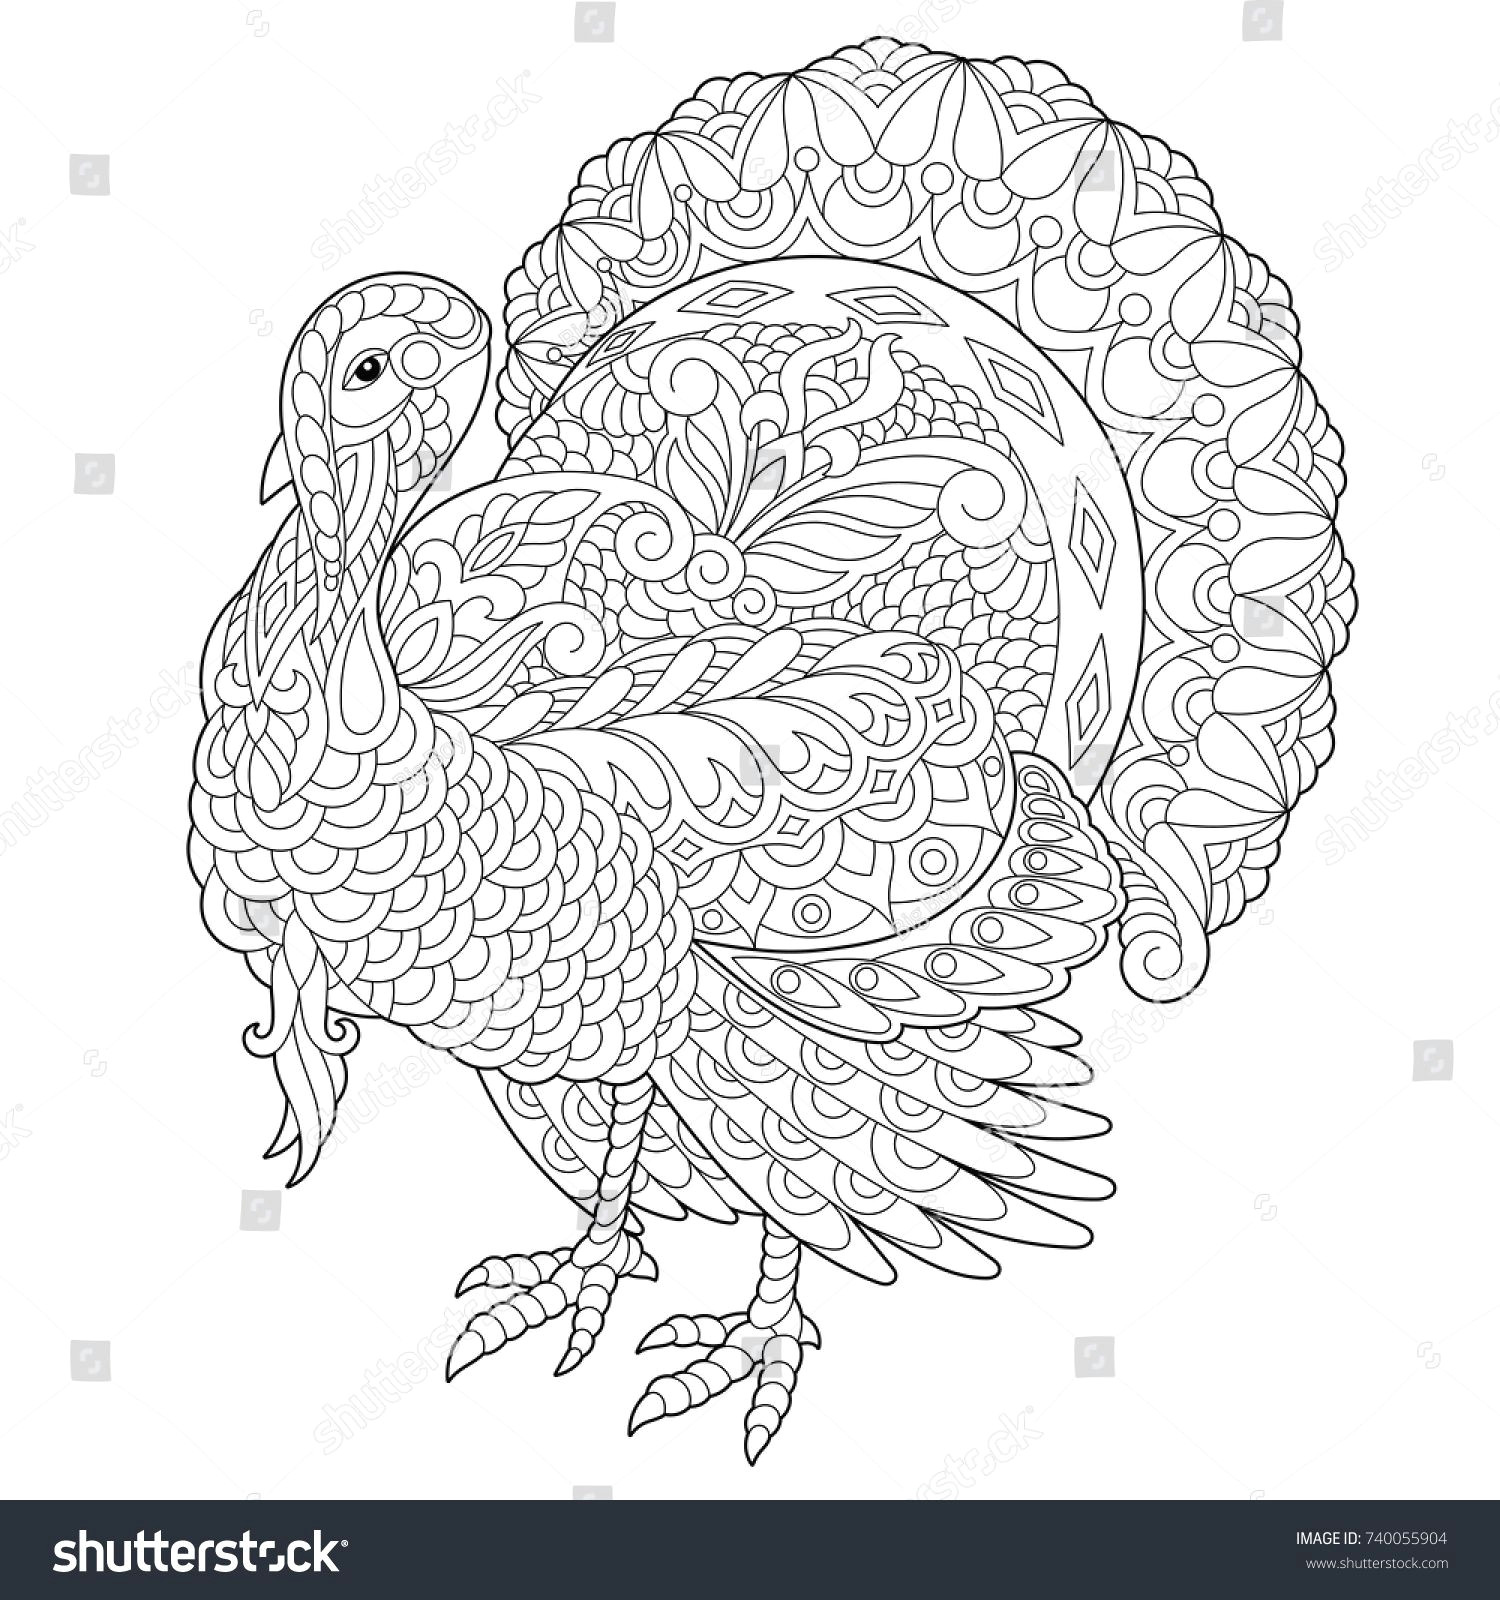 coloring page of turkey for thanksgiving day greeting card freehand sketch drawing for adult antistress coloring book with doodle and zentangle elements